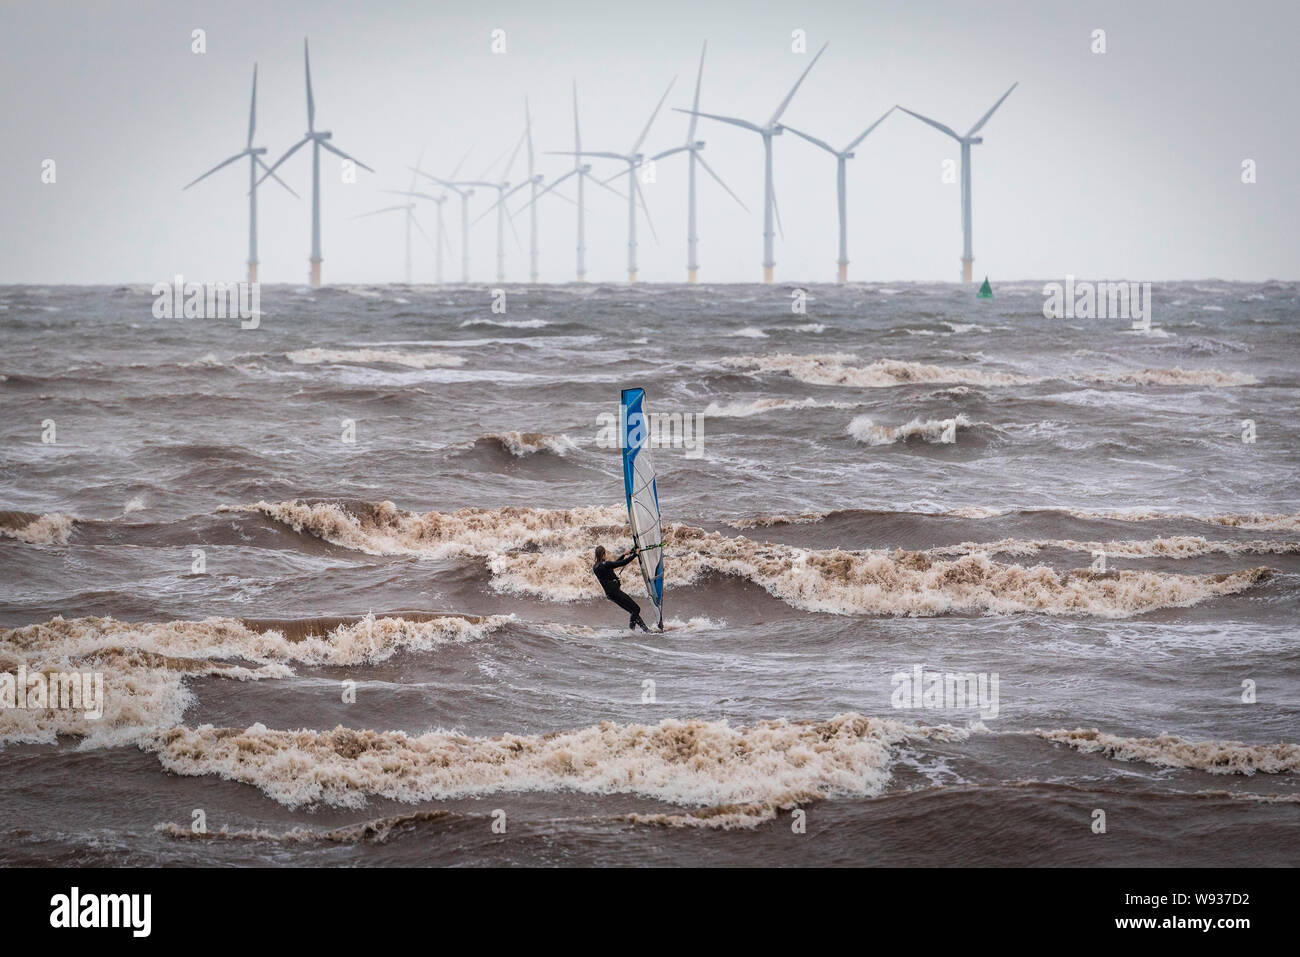 Windsurfer in the river Mersey at Crosby beach on a stormy day. Windpower. Liverpool Bay offshore windfarm. Clean green electricity. Stock Photo